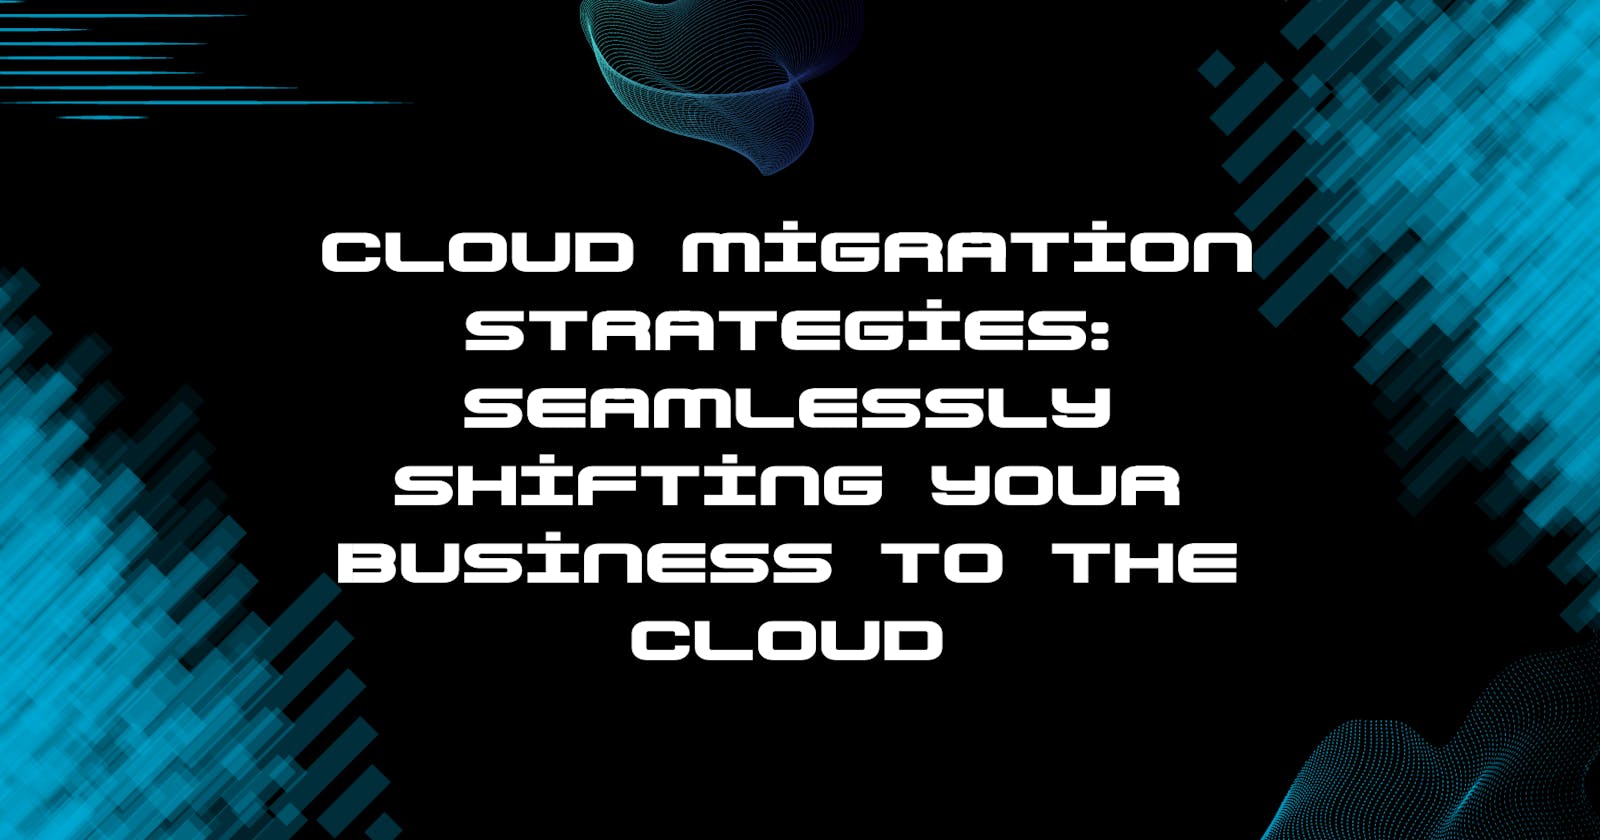 Cloud Migration Strategies: Seamlessly Shifting Your Business to the Cloud